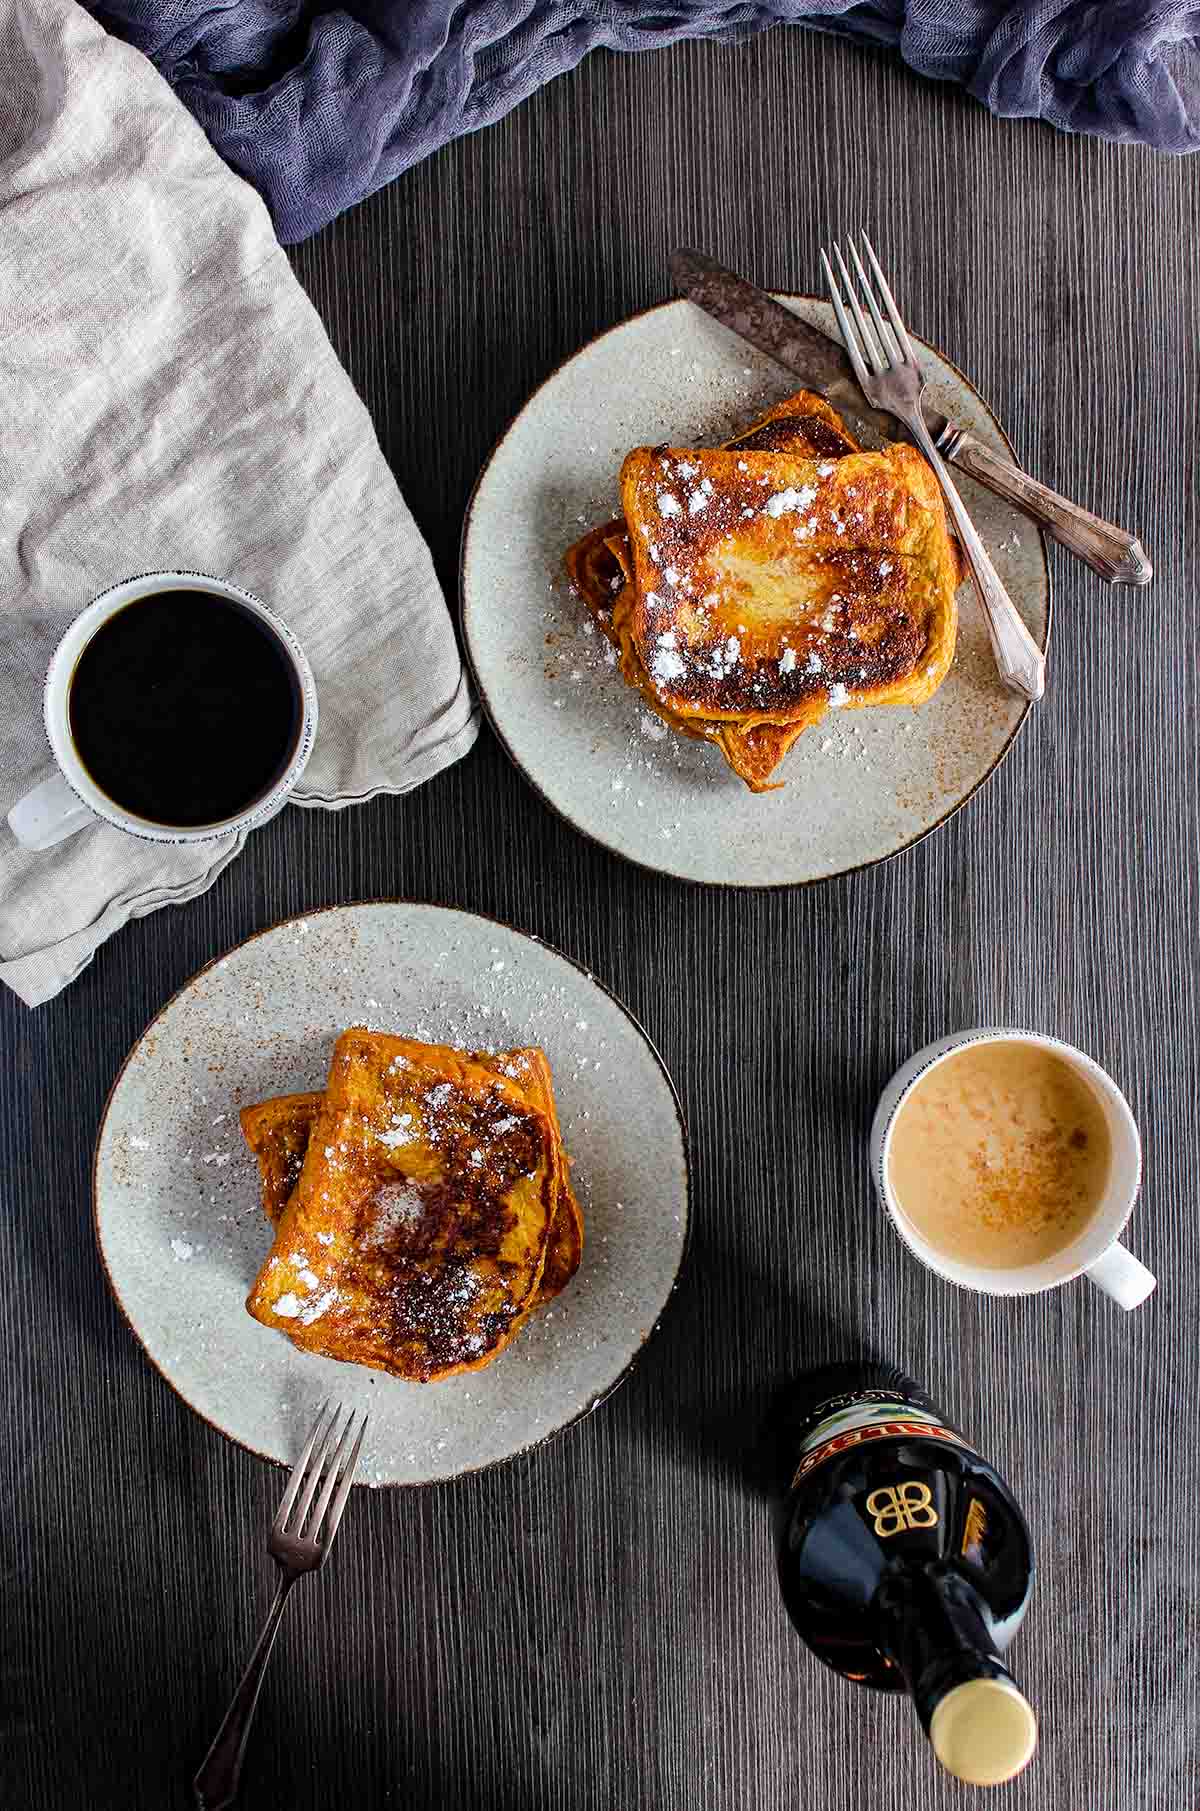 Two plates of Baileys French toast with two cups of coffee and a bottle of Baileys Irish Cream.